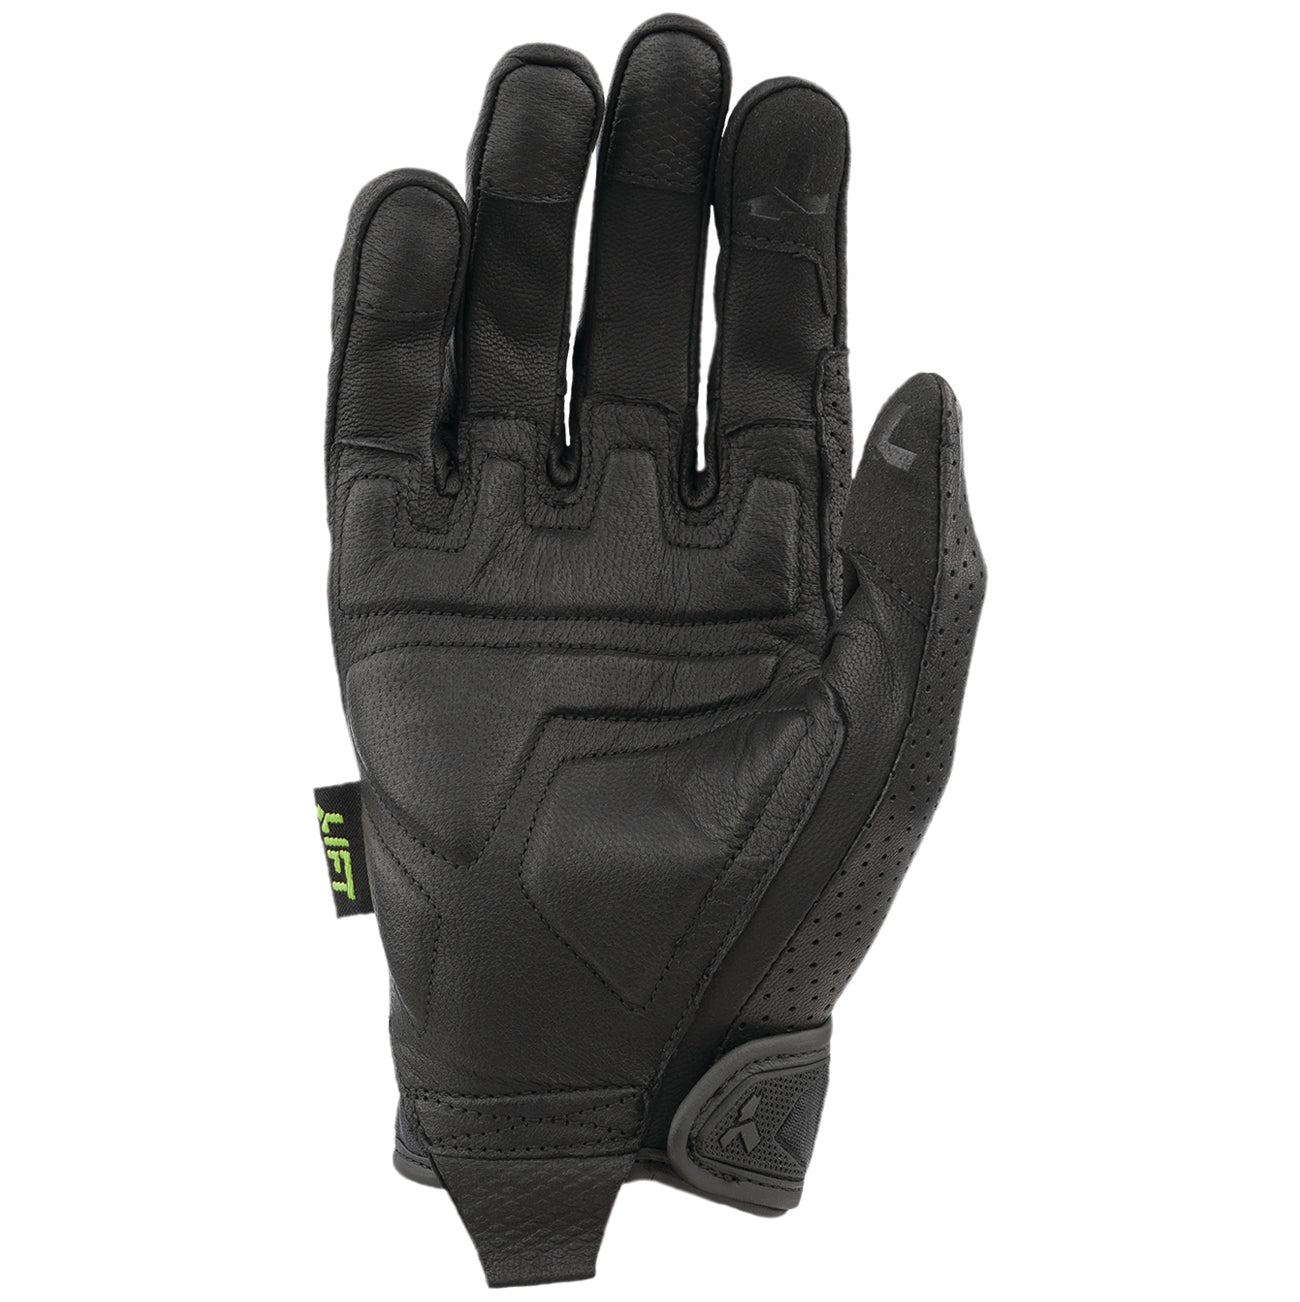 TACKER Winter Glove (Black) with Thinsulate | LIFT Safety